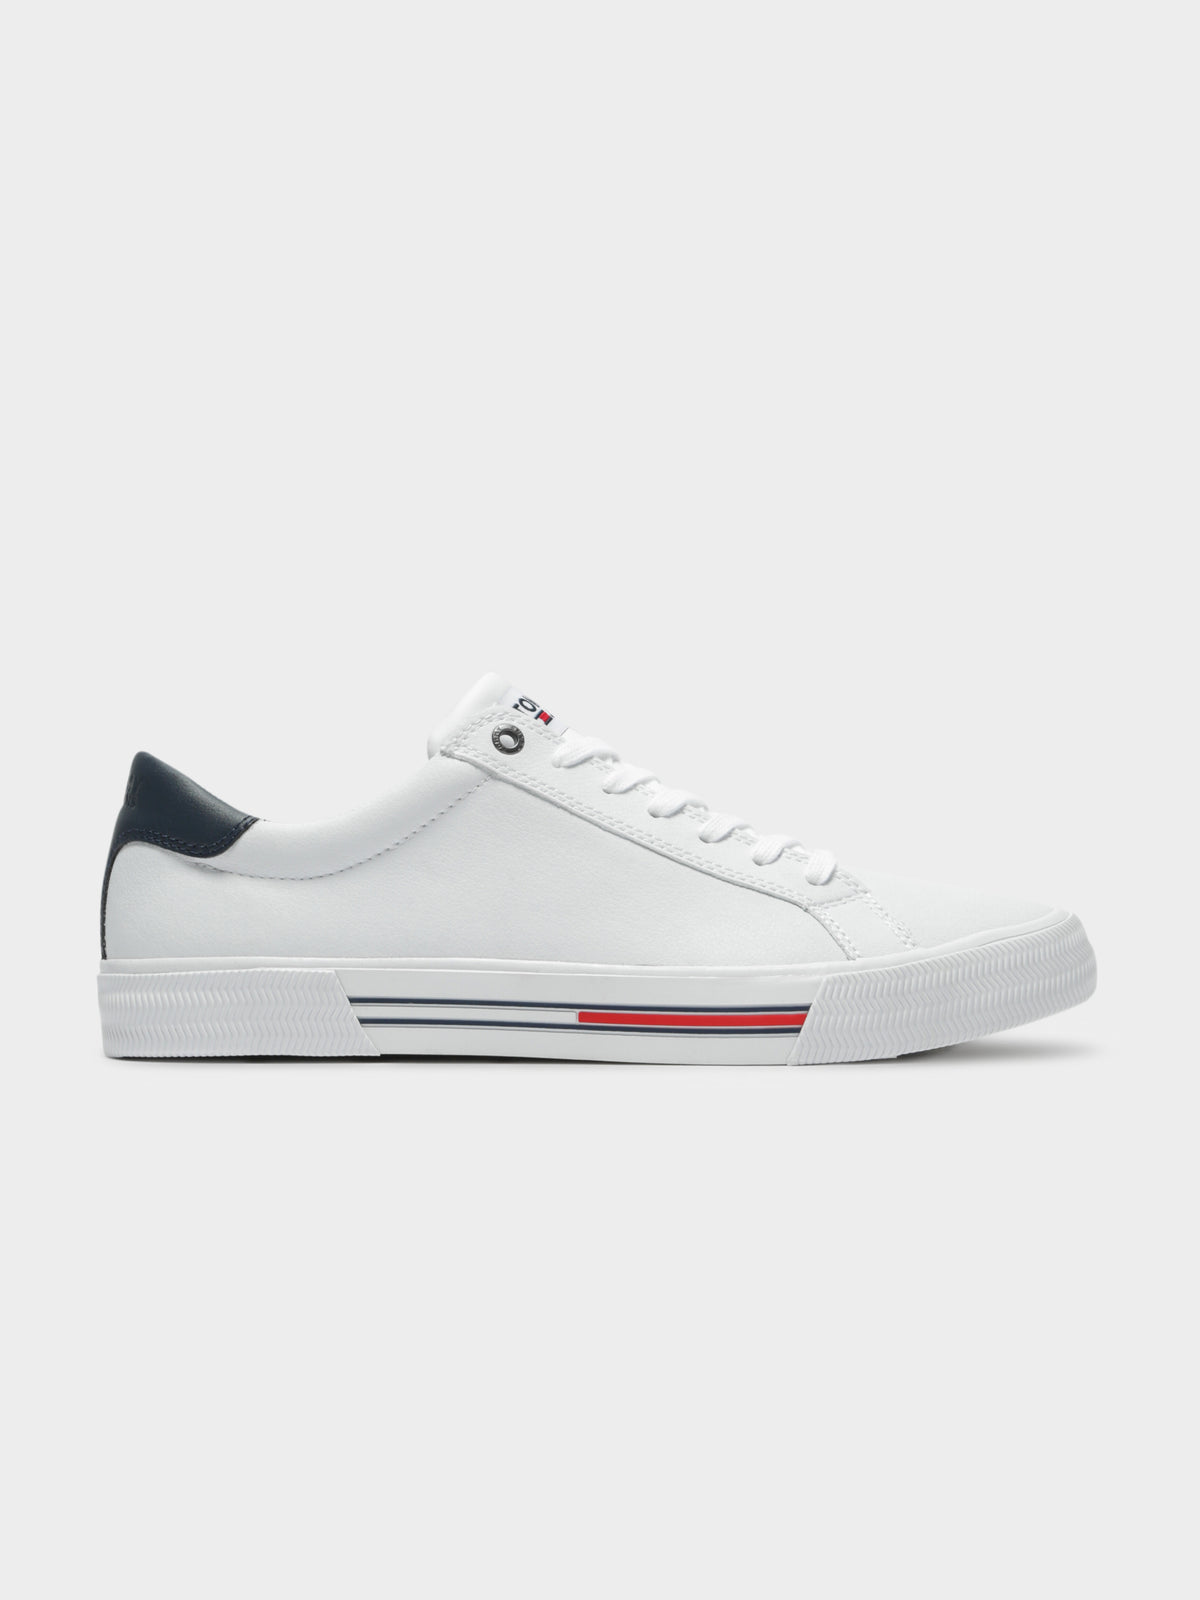 Essential Leather Sneakers in White